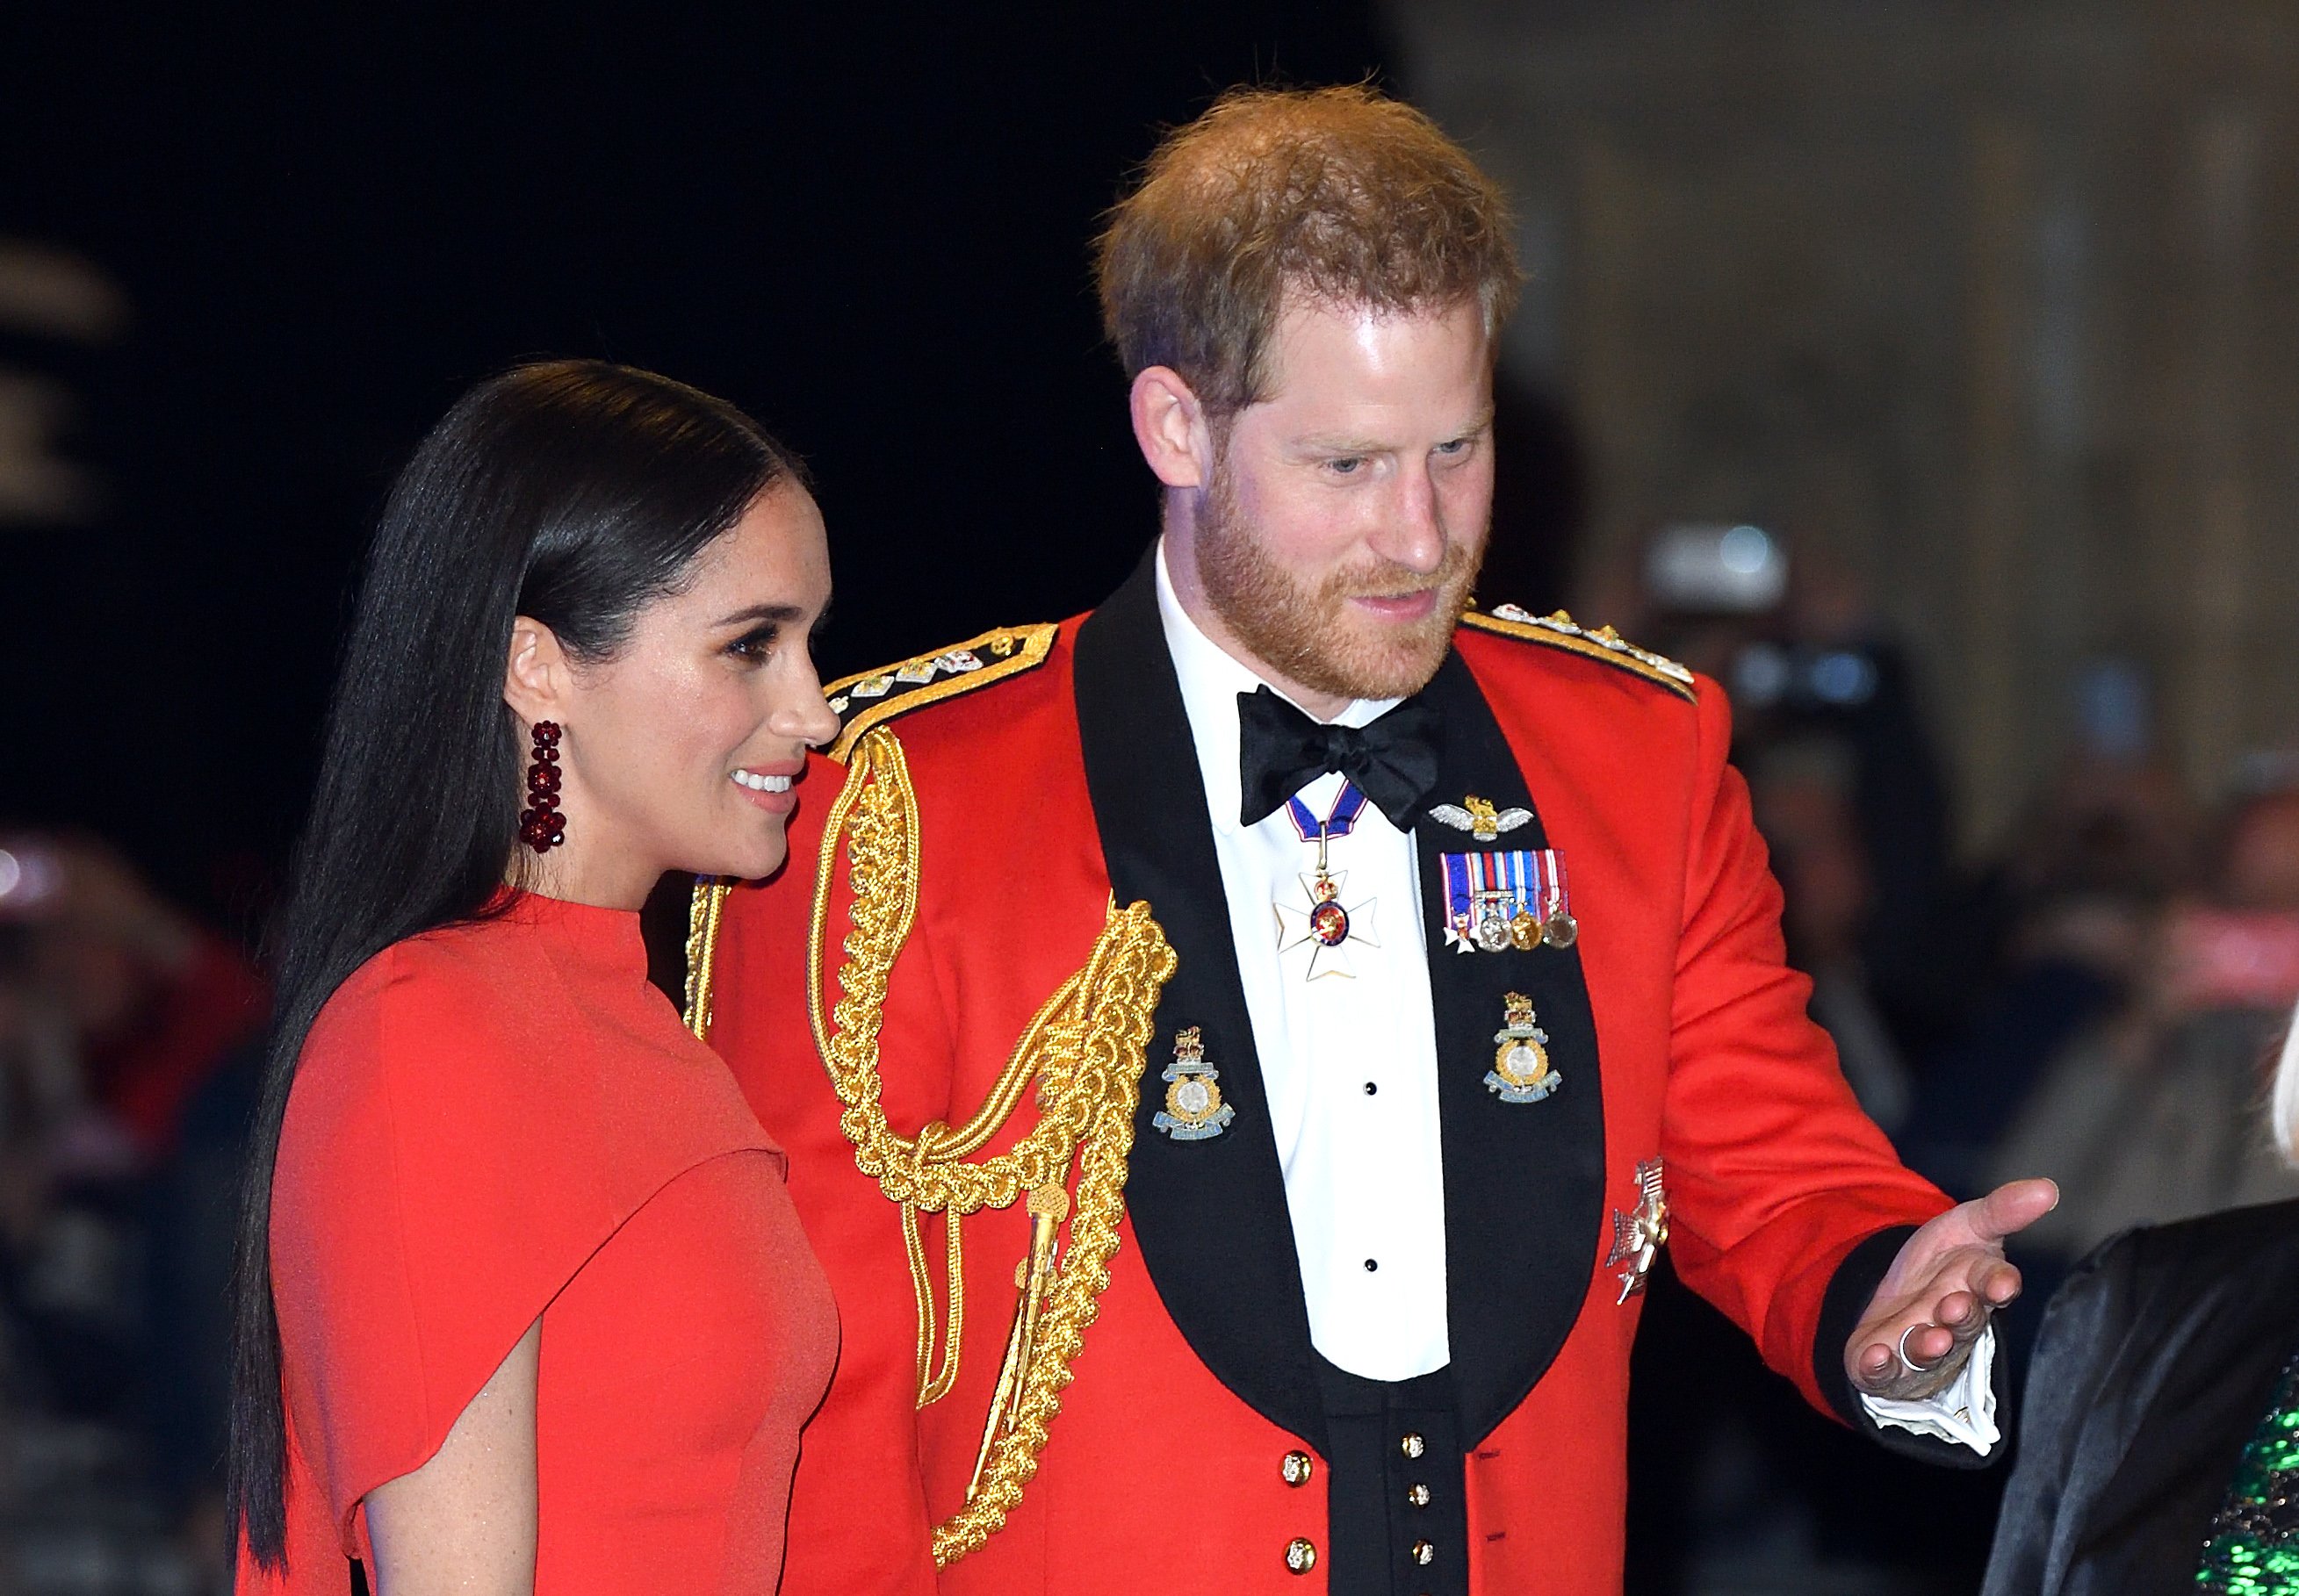 rince Harry, Duke of Sussex and Meghan, Duchess of Sussex attend the Mountbatten Festival of Music at Royal Albert Hall on March 07, 2020 in London, England. | Source: Getty Images